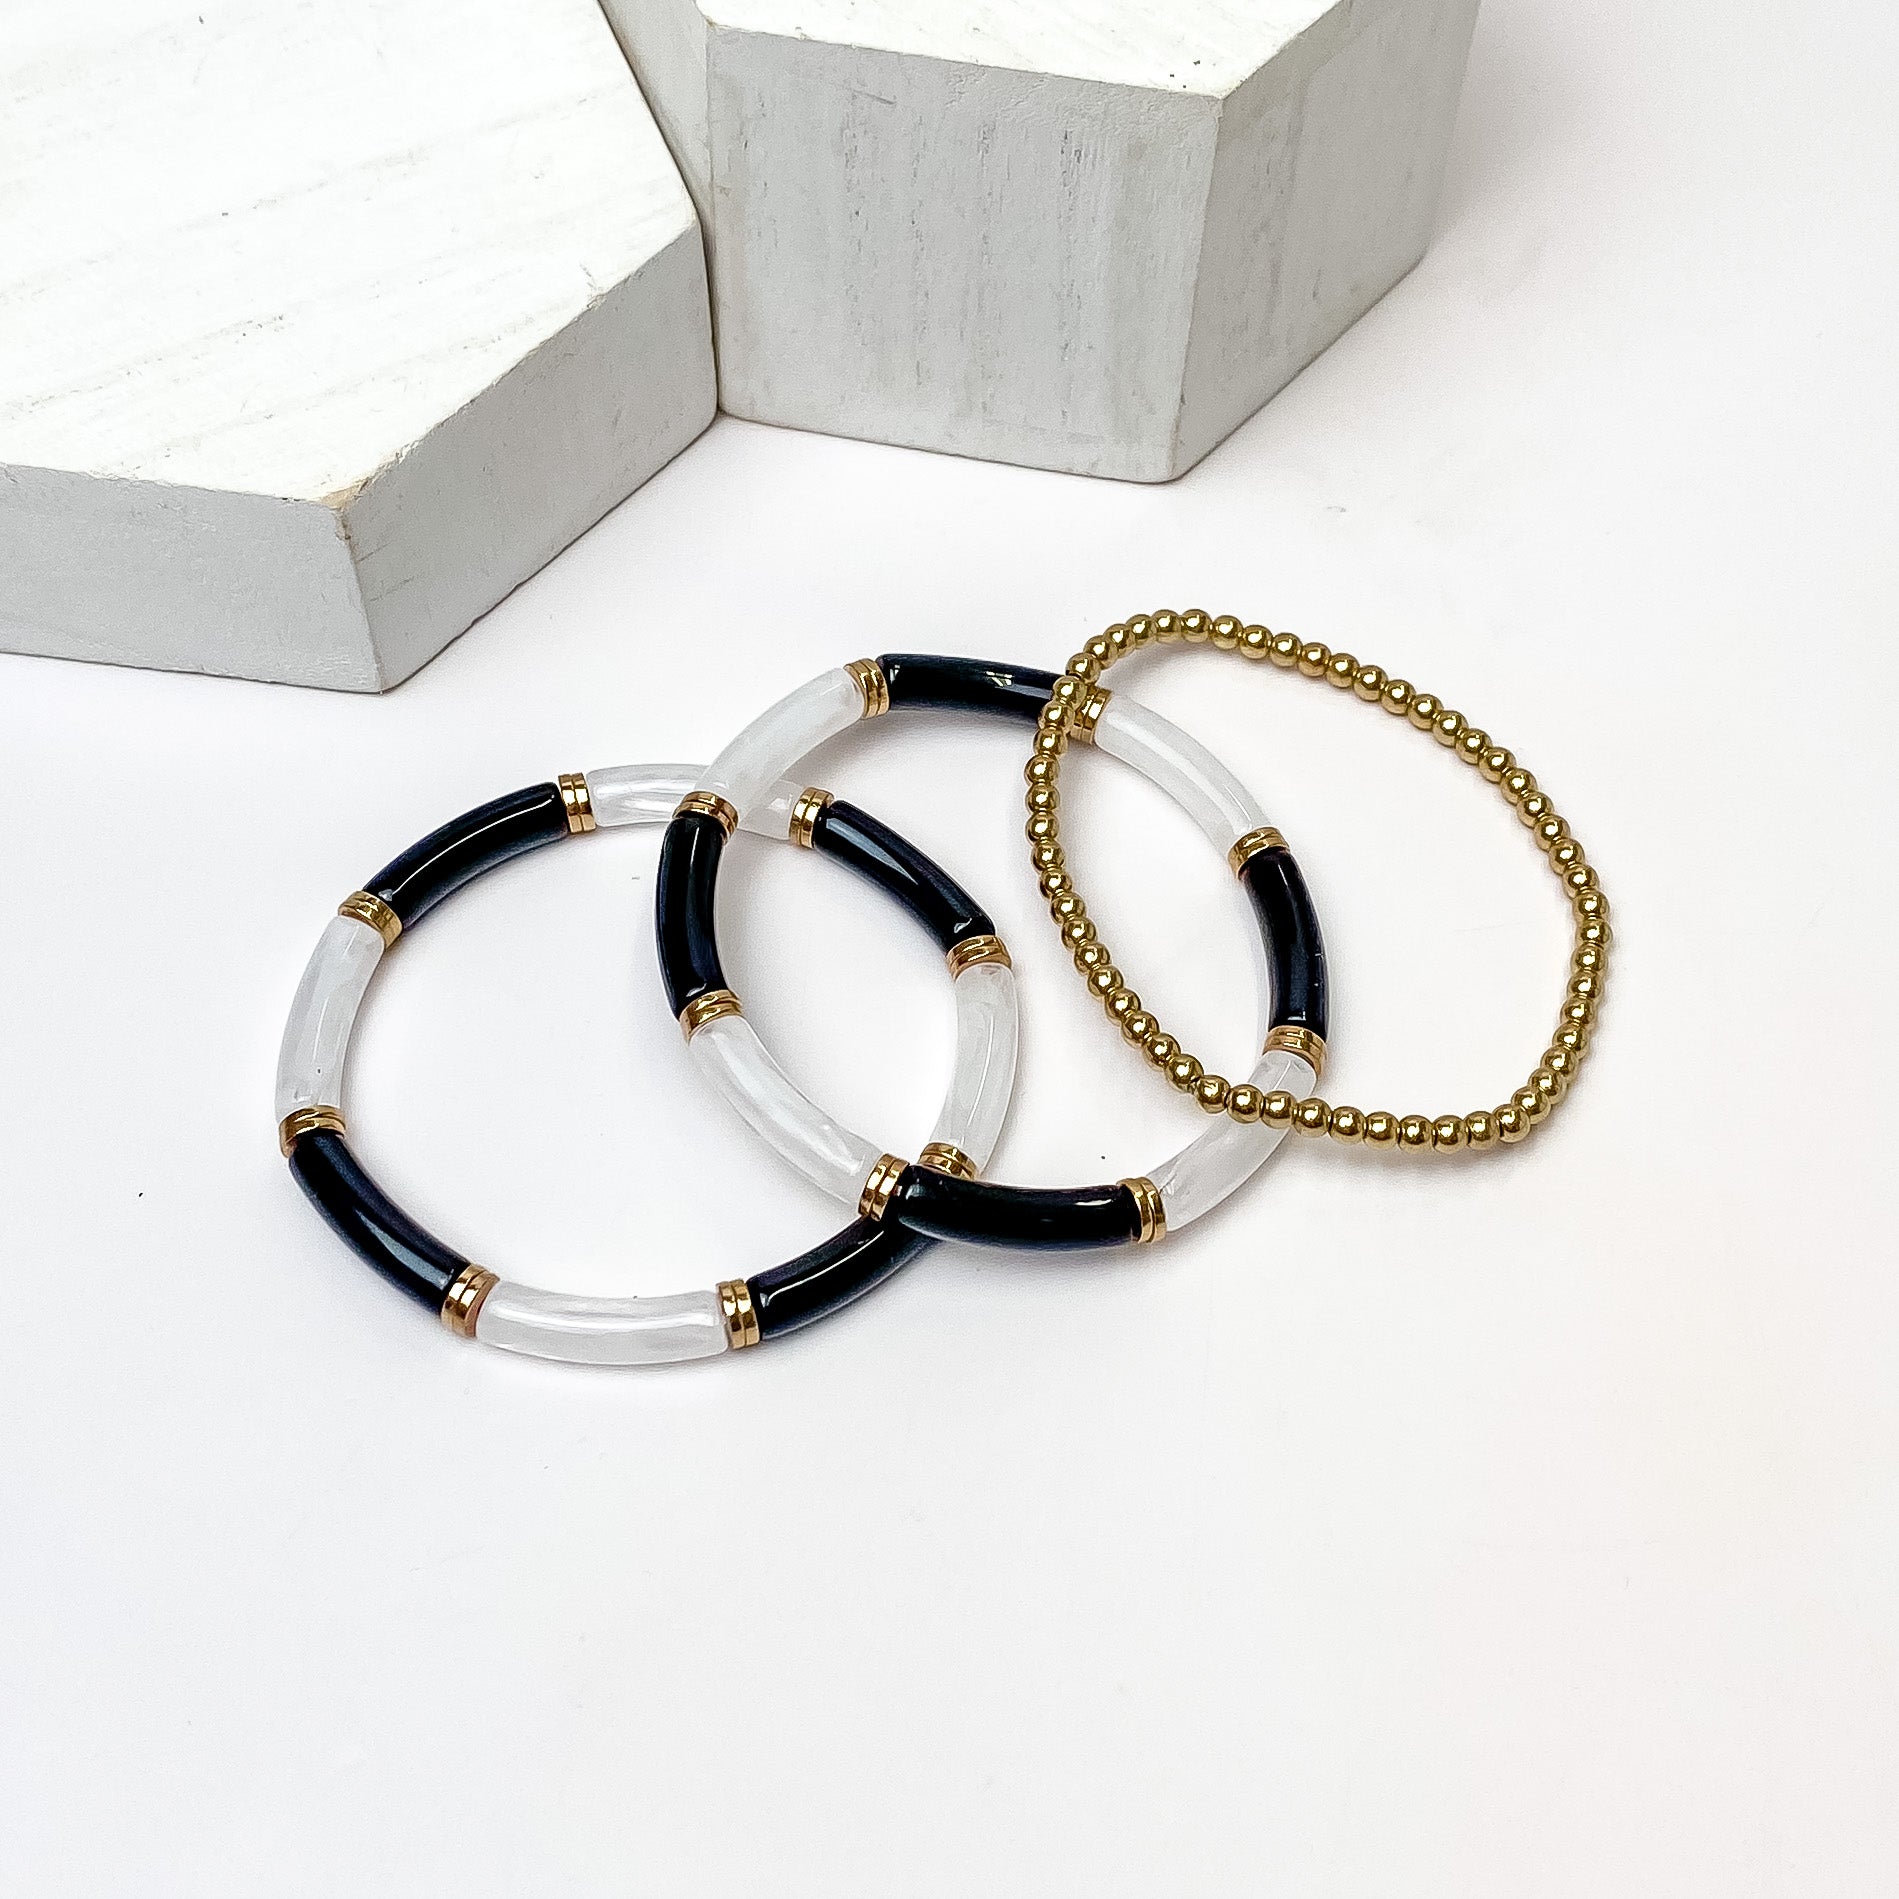 Set of Three | Summer Nights Black, White, and Gold Tone Tube Bracelet Set. Pictured on a white background with white objects above the bracelets. 